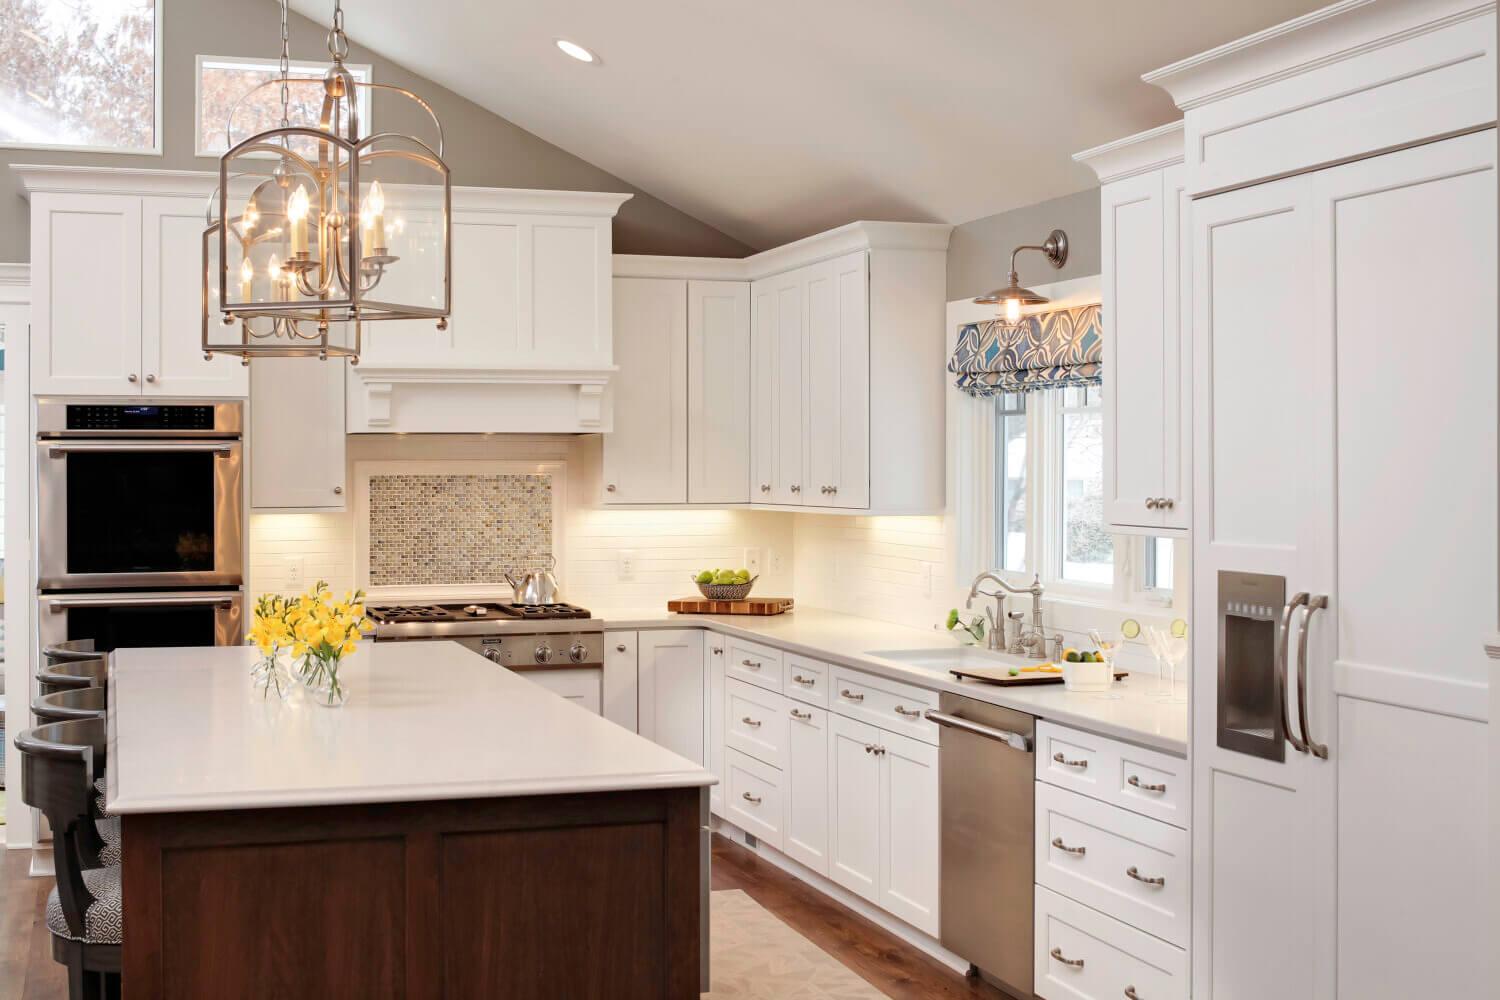 A Complete Home Remodel For a Forest Lake Home - Dura Supreme Cabinetry